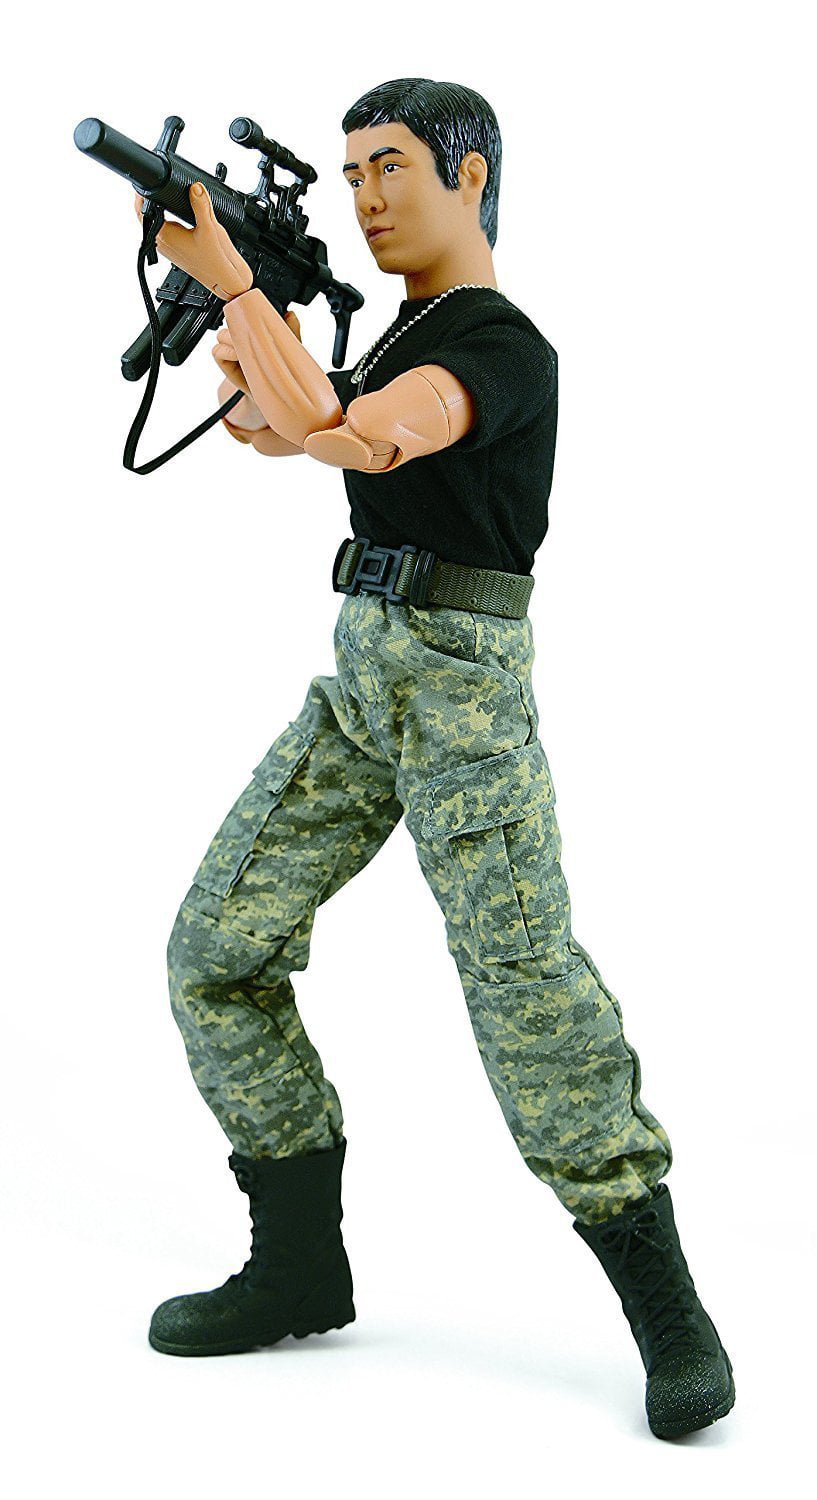 world peacekeepers 12 inch action figures